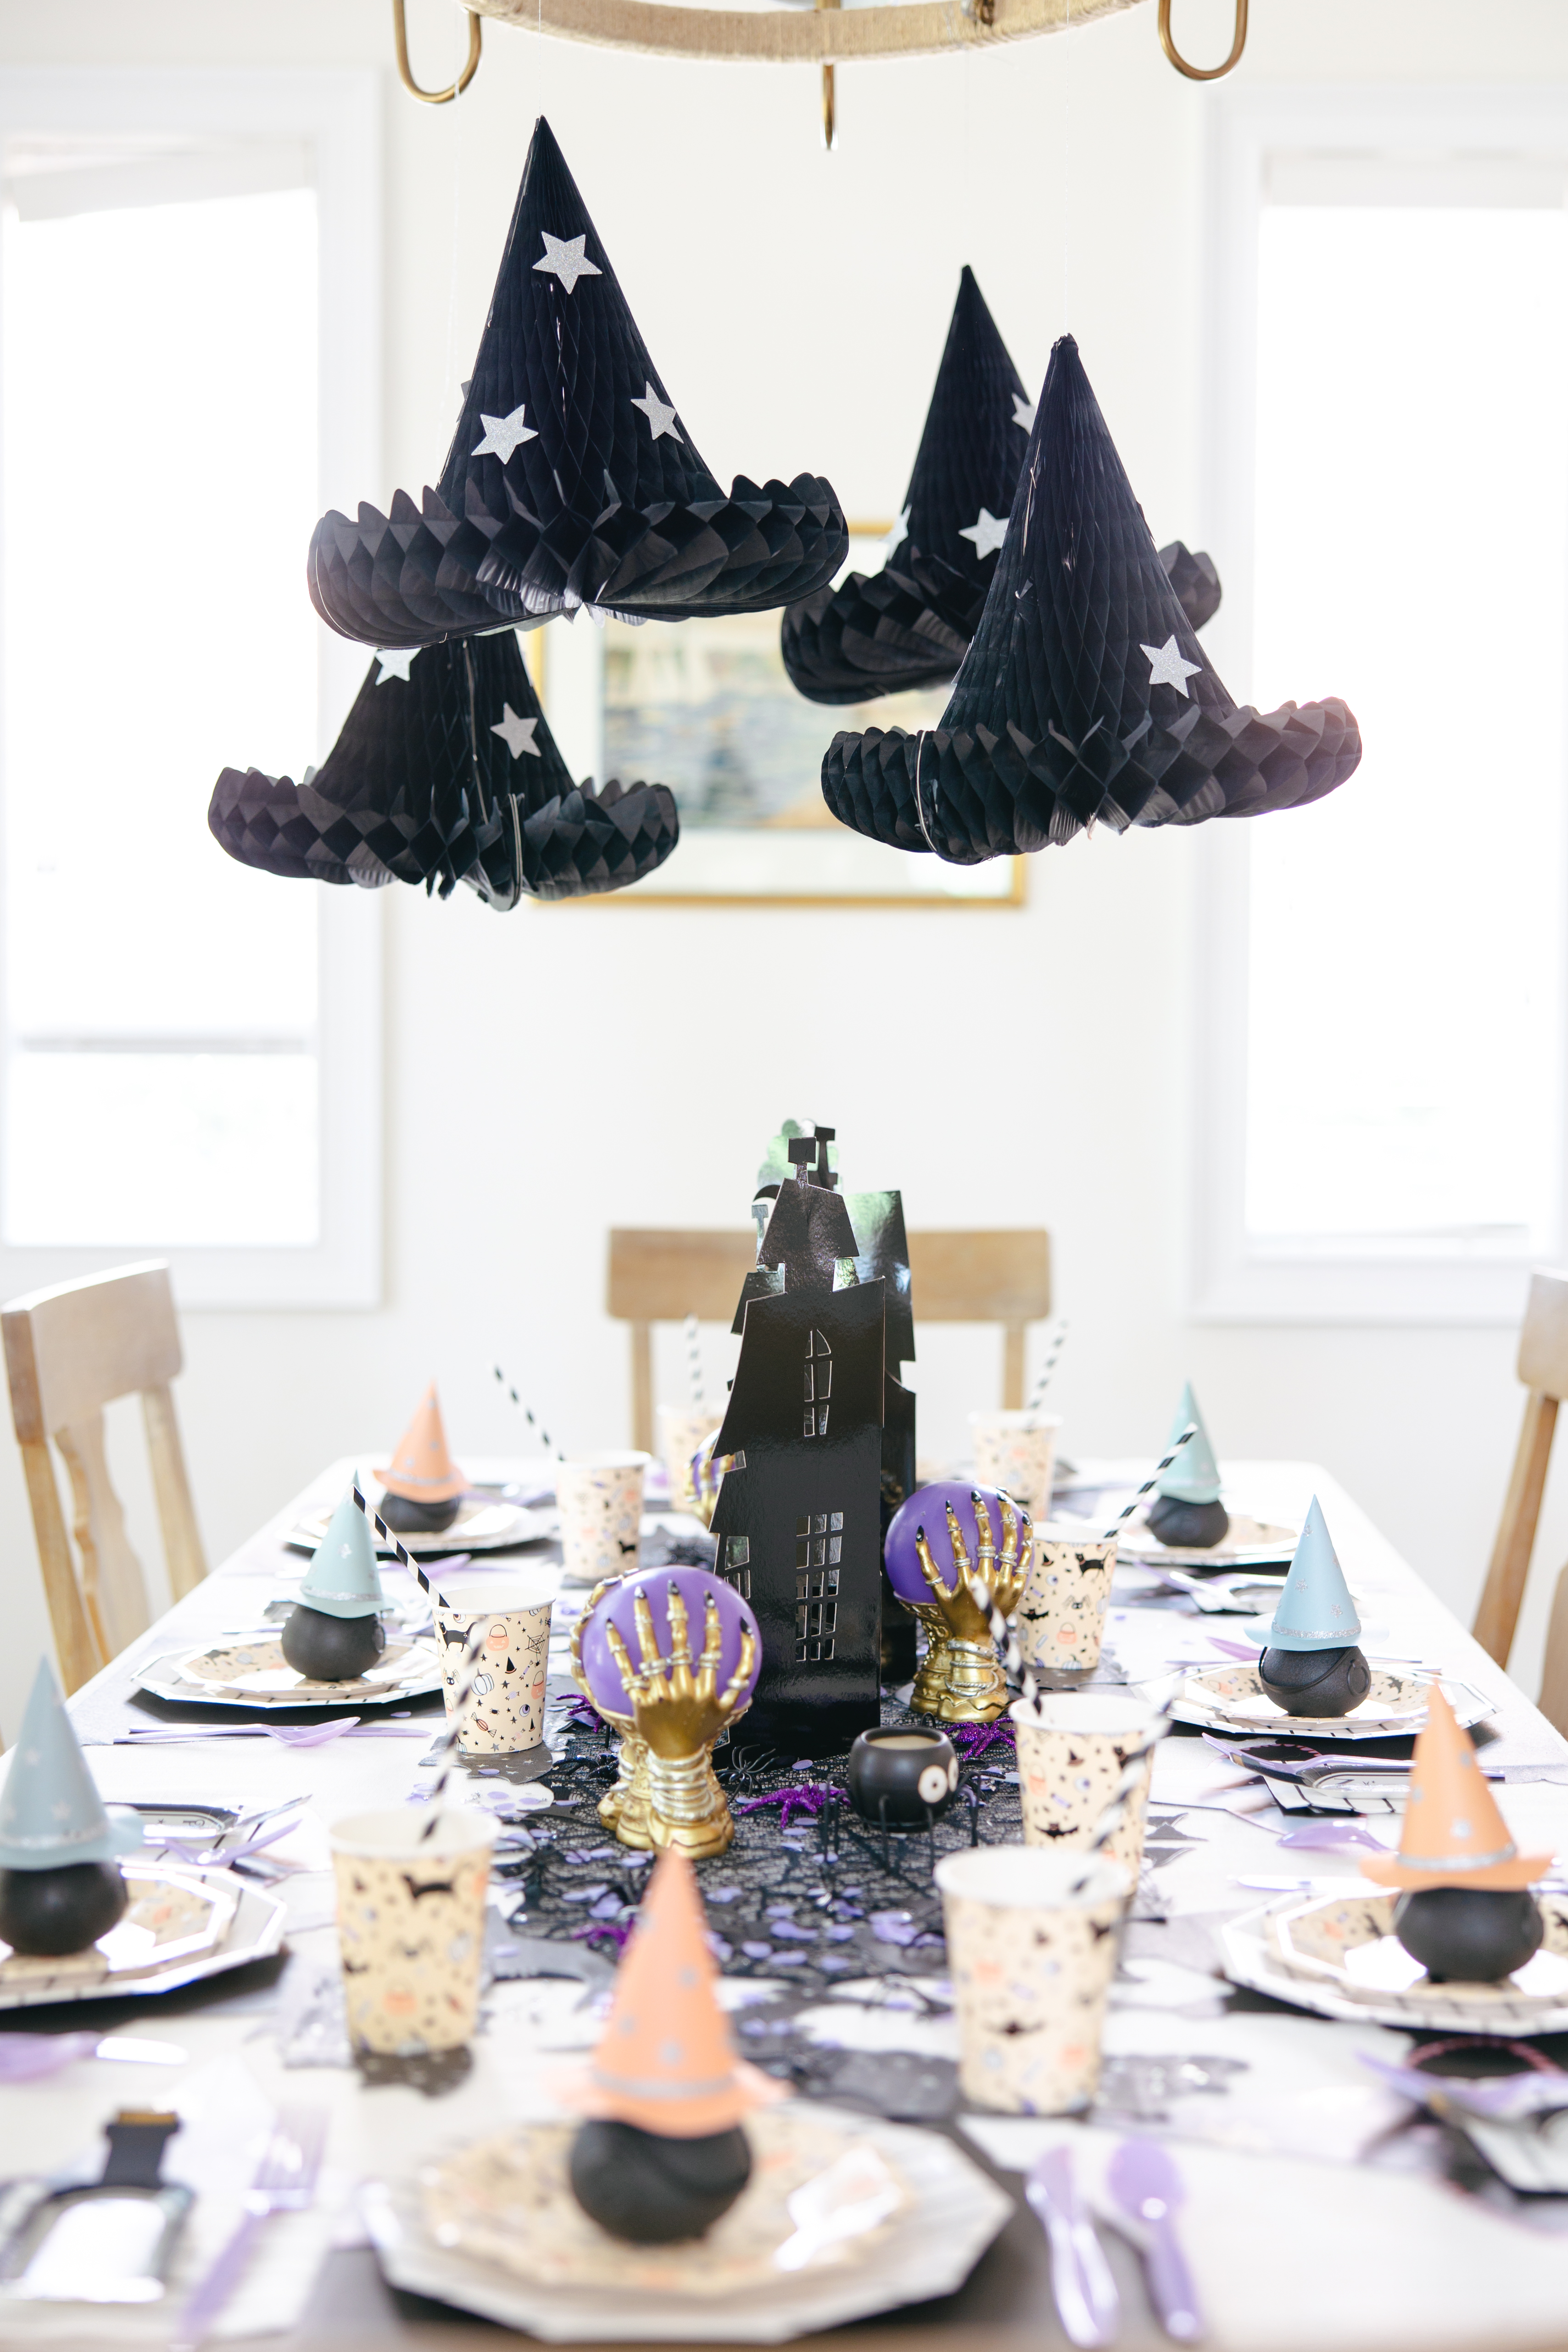 Overview of the witch table with a focus on the Meri Meri honeycomb witch hats.
